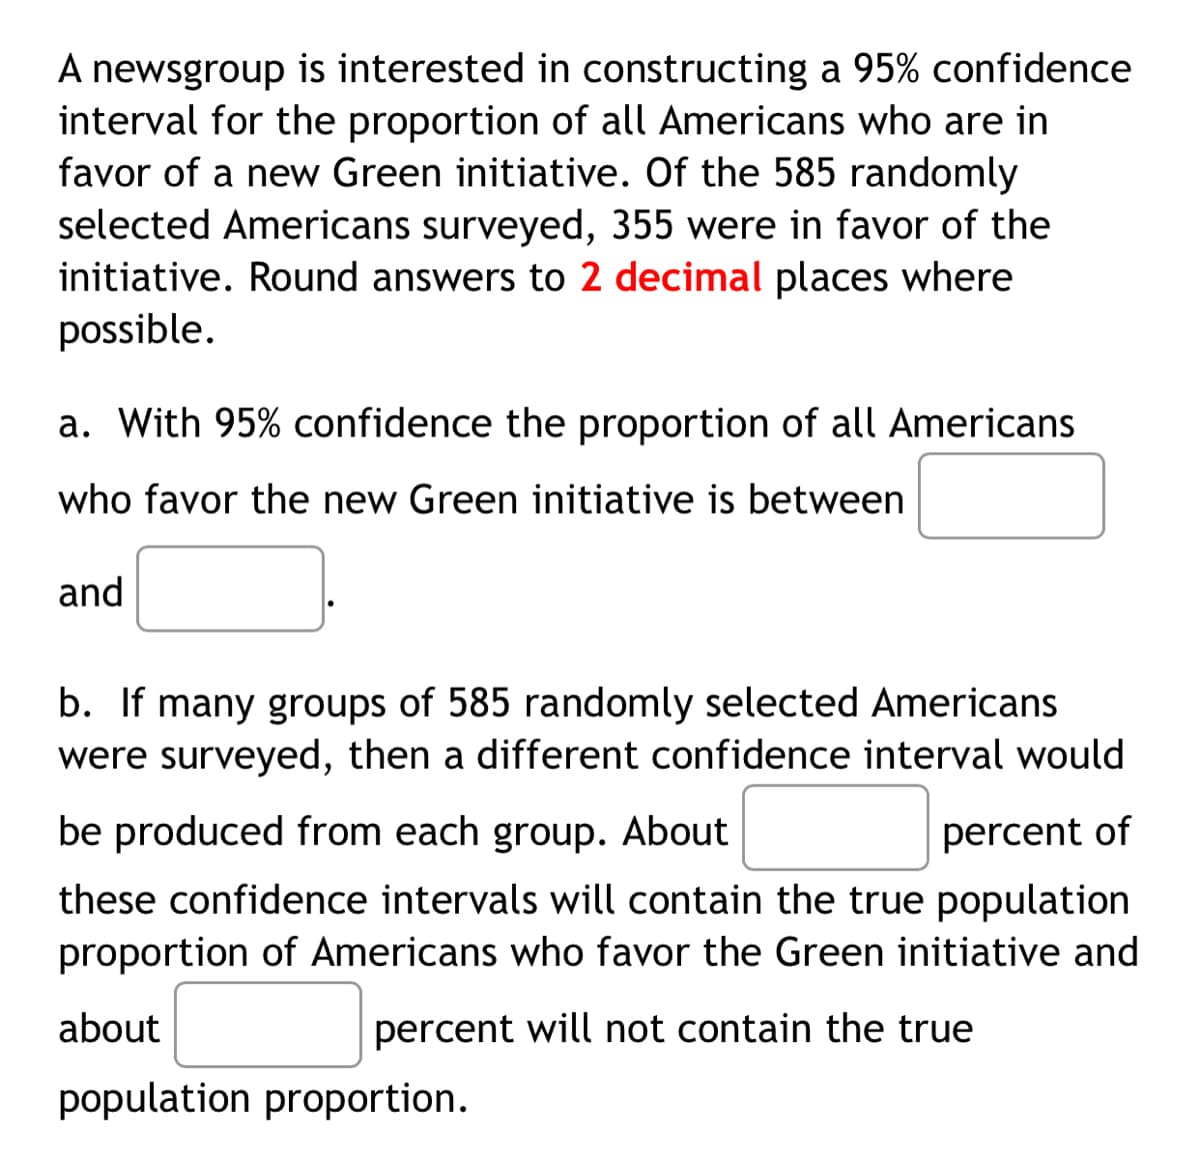 A newsgroup is interested in constructing a 95% confidence
interval for the proportion of all Americans who are in
favor of a new Green initiative. Of the 585 randomly
selected Americans surveyed, 355 were in favor of the
initiative. Round answers to 2 decimal places where
possible.
a. With 95% confidence the proportion of all Americans
who favor the new Green initiative is between
and
b. If many groups of 585 randomly selected Americans
were surveyed, then a different confidence interval would
be produced from each group. About
percent of
these confidence intervals will contain the true population
proportion of Americans who favor the Green initiative and
about
percent will not contain the true
population proportion.
